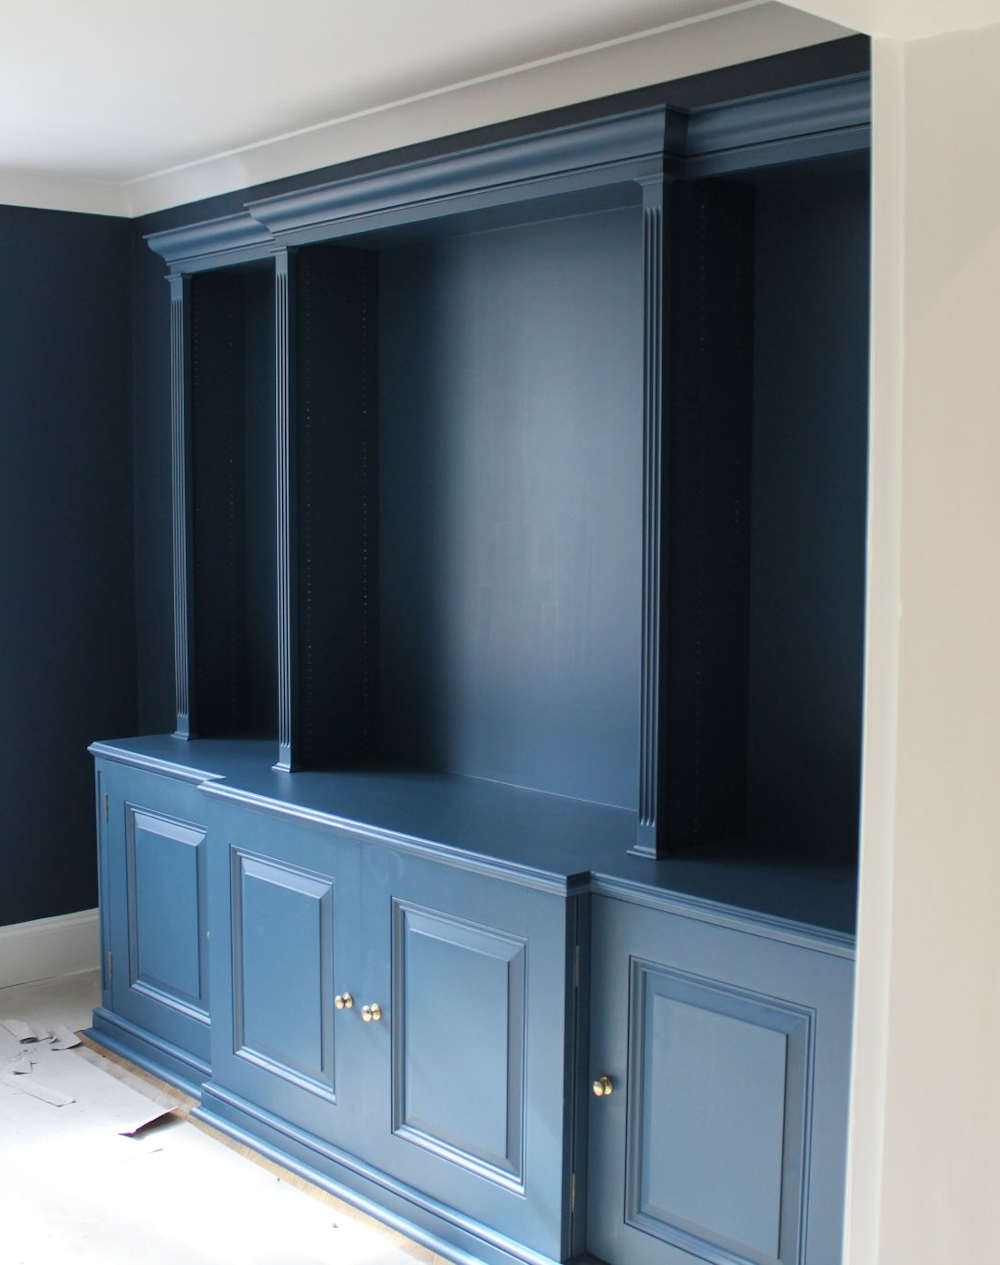 Painted cabinetry